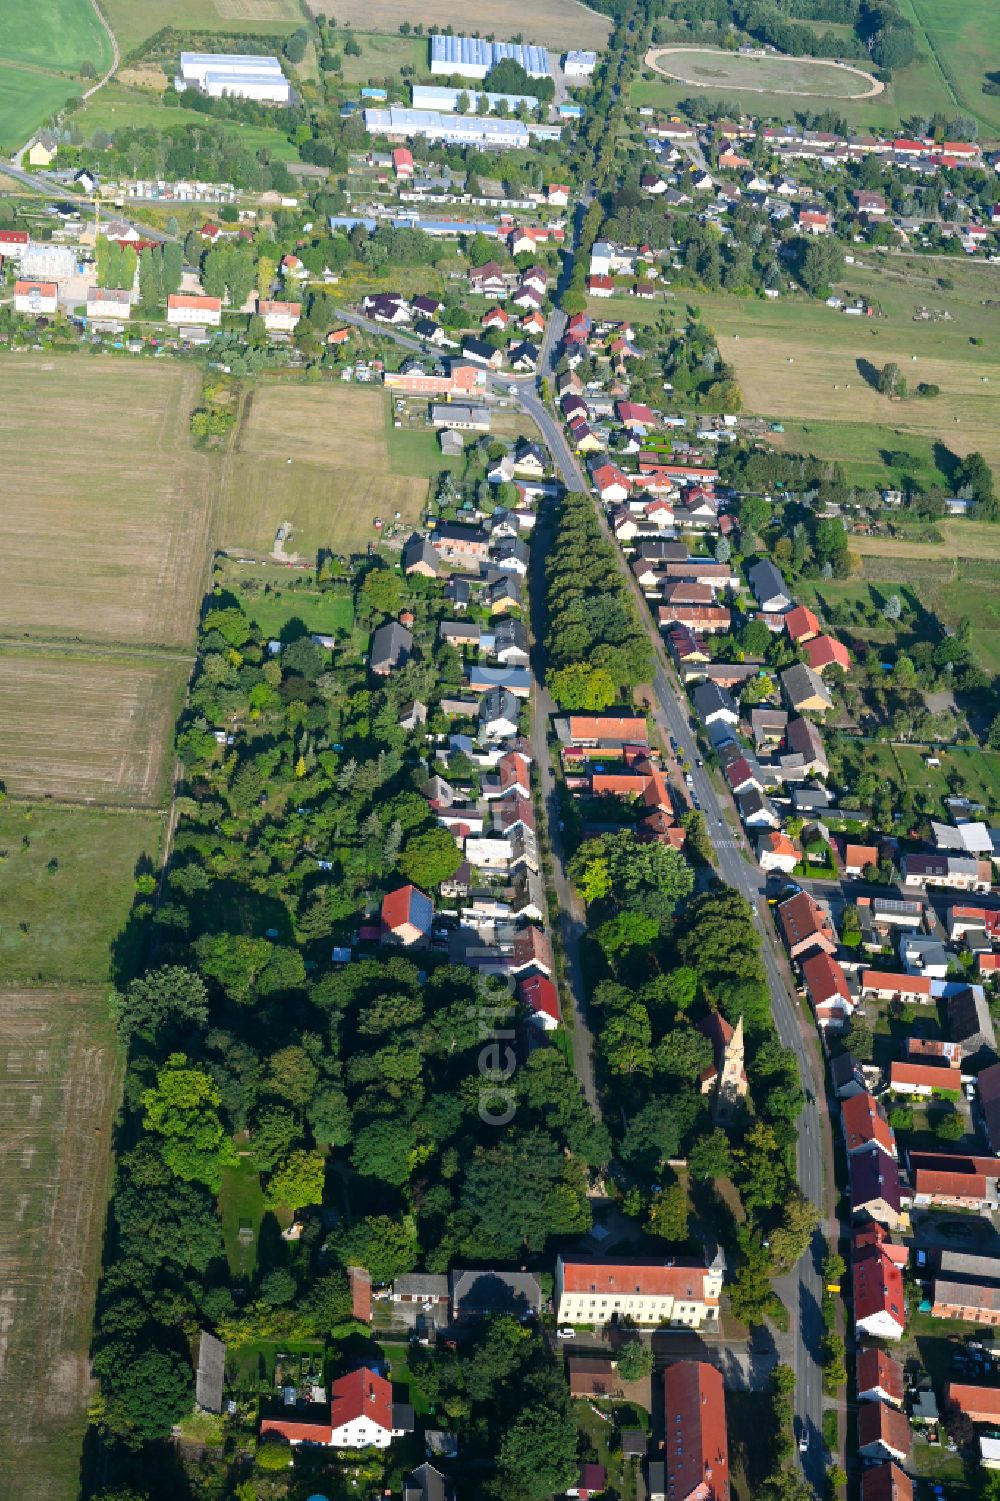 Zehlendorf from above - Village view on the edge of agricultural fields and land in Zehlendorf in the state Brandenburg, Germany